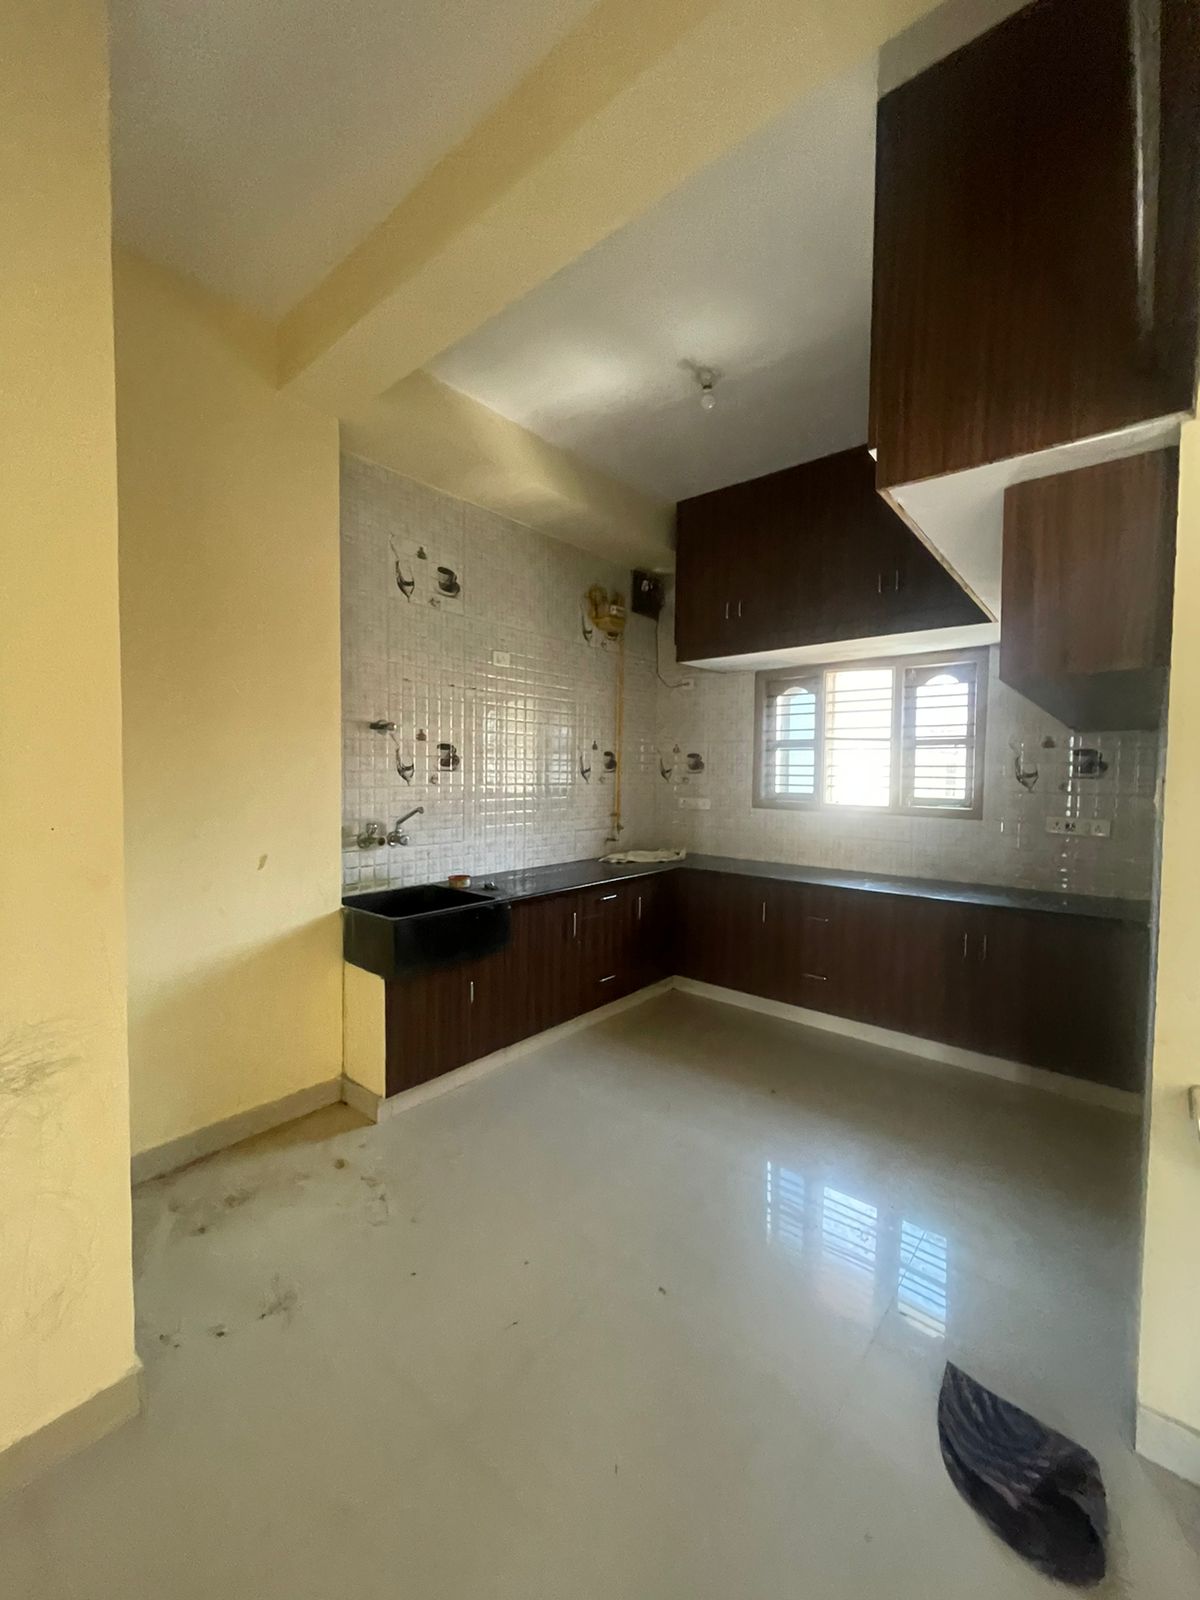 1 BHK Independent House for Lease Only at JAML2 - 4619 - 18 Lakhs in Dodda Banaswadi